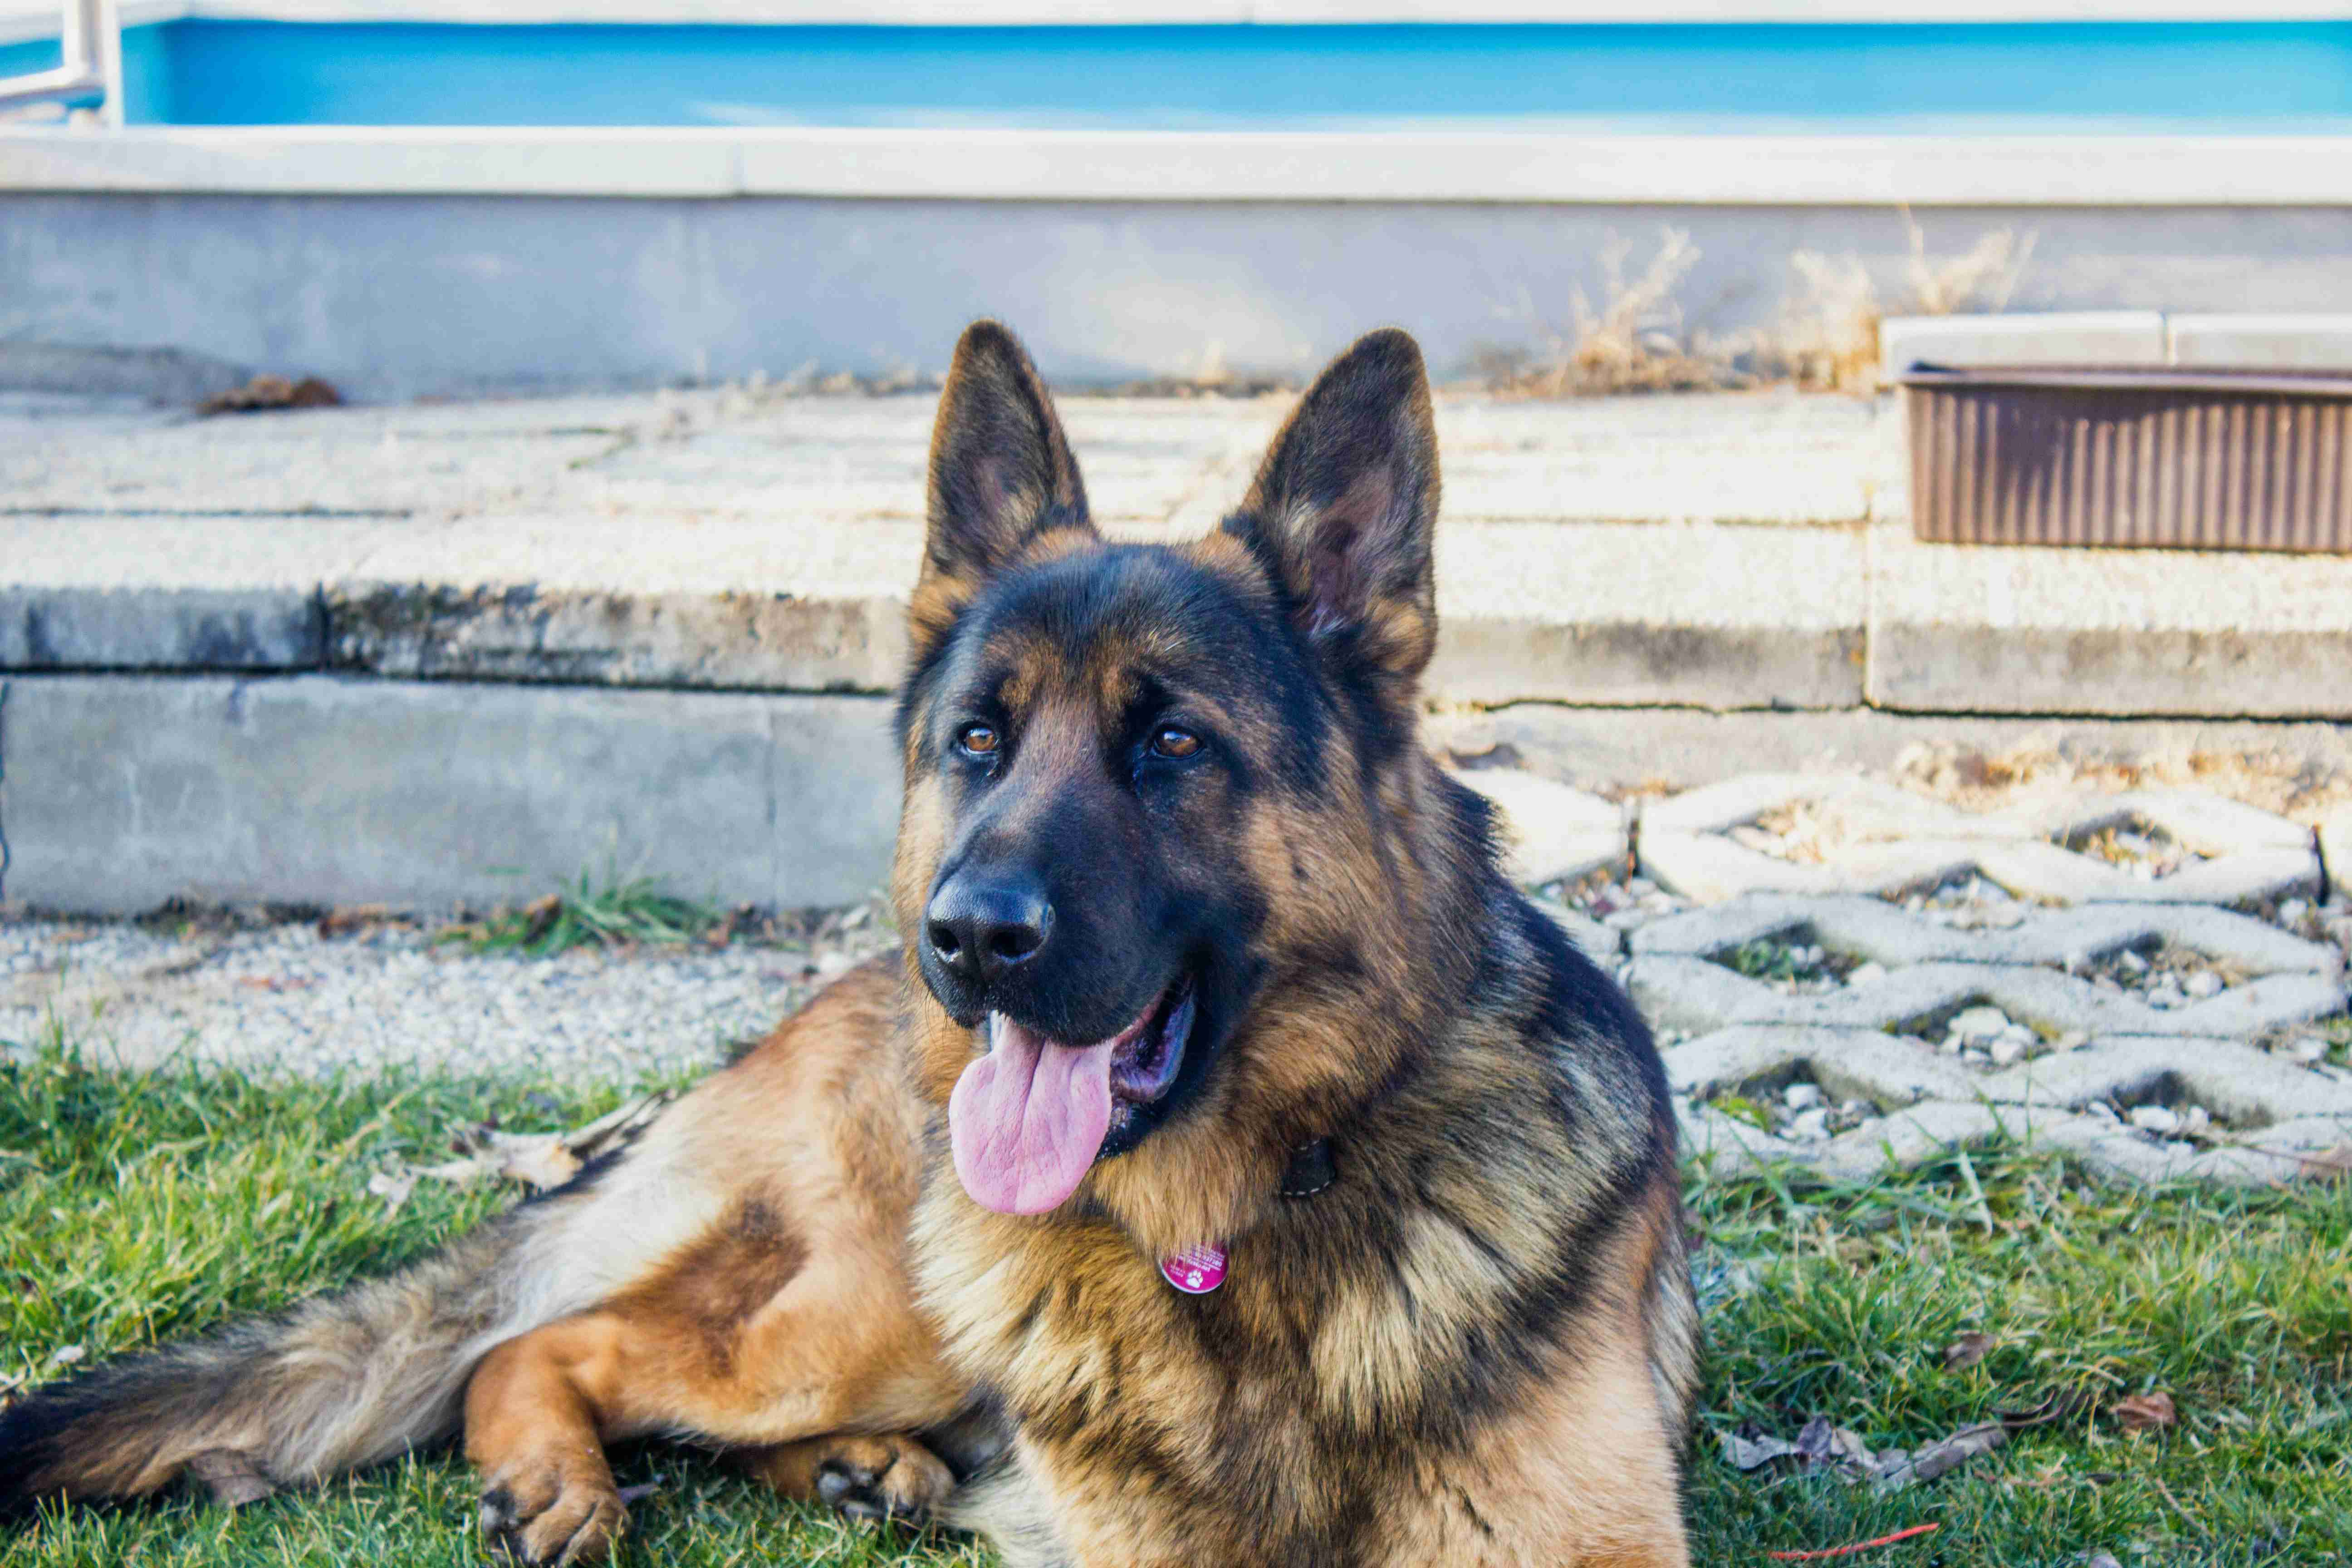 Are German shepherds prone to any specific dental issues?